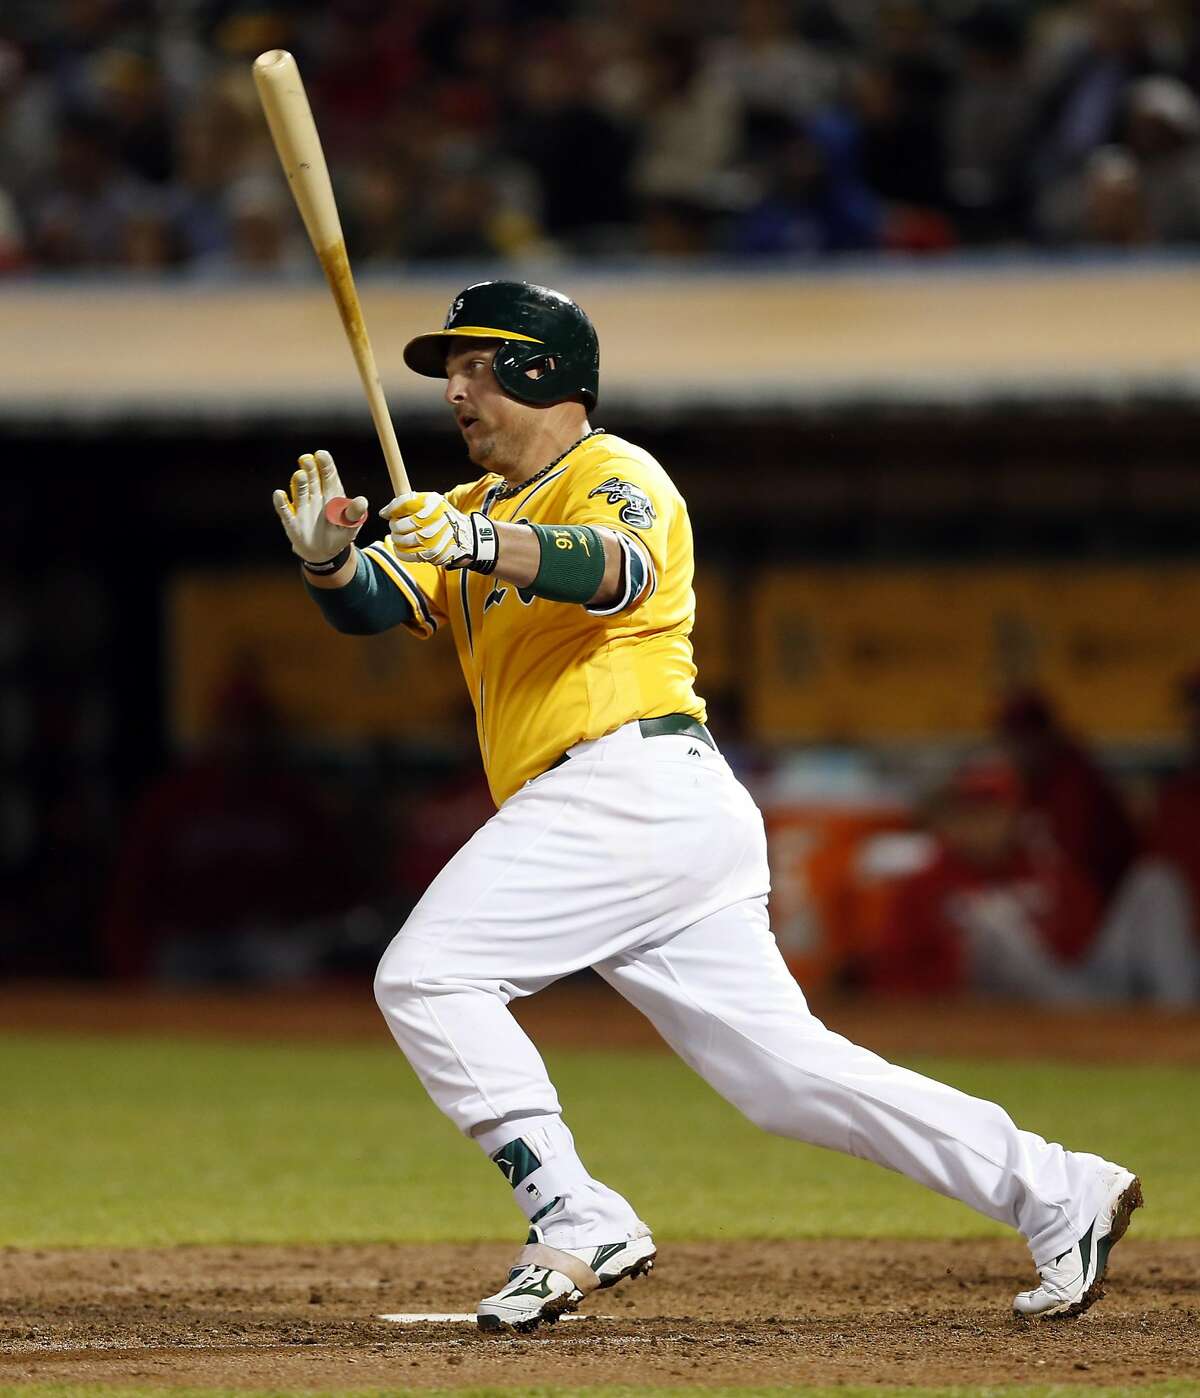 Oakland Athletics' Billy Butler singles in 8th inning of A's 3-2 win over Los Angeles Angels in MLB game at Oakland Coliseum in Oakland, Calif., on Tuesday, September 6, 2016.